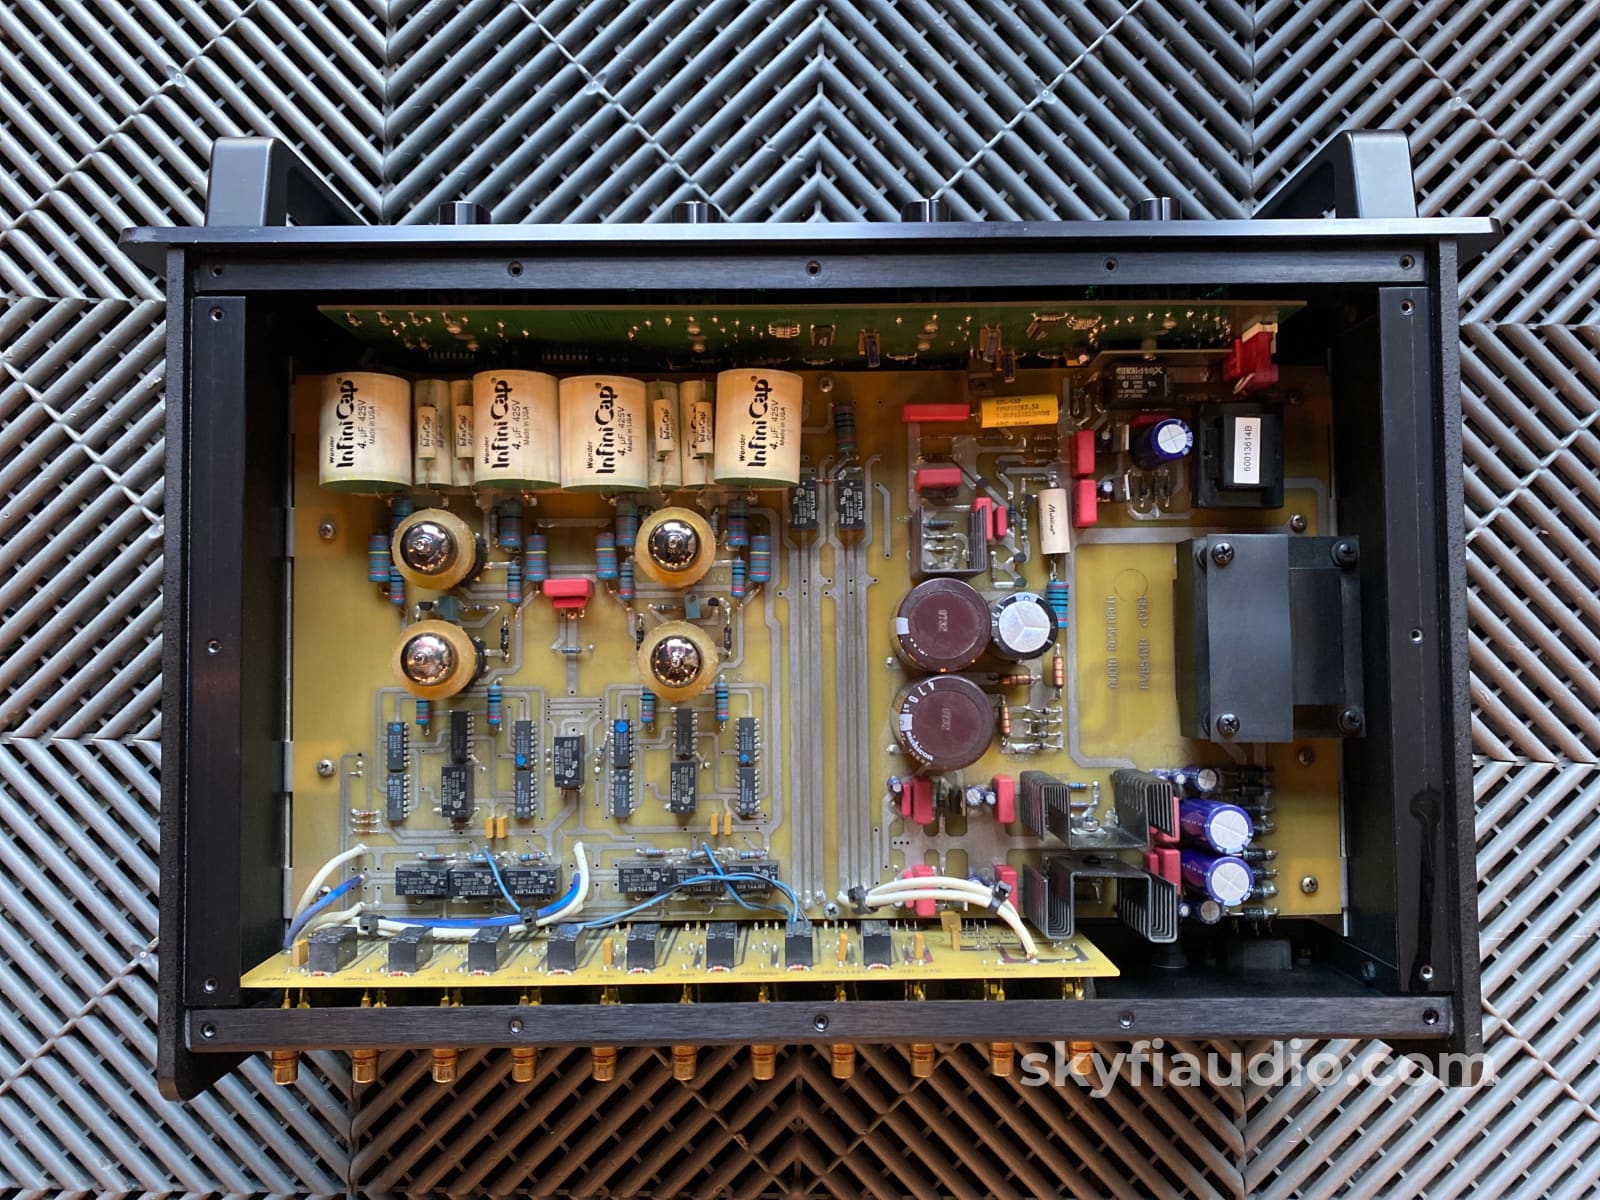 Audio Research Ls25 Mki Tube Preamp W/ Factory High Gain & Sonic Improvement Mods Installed